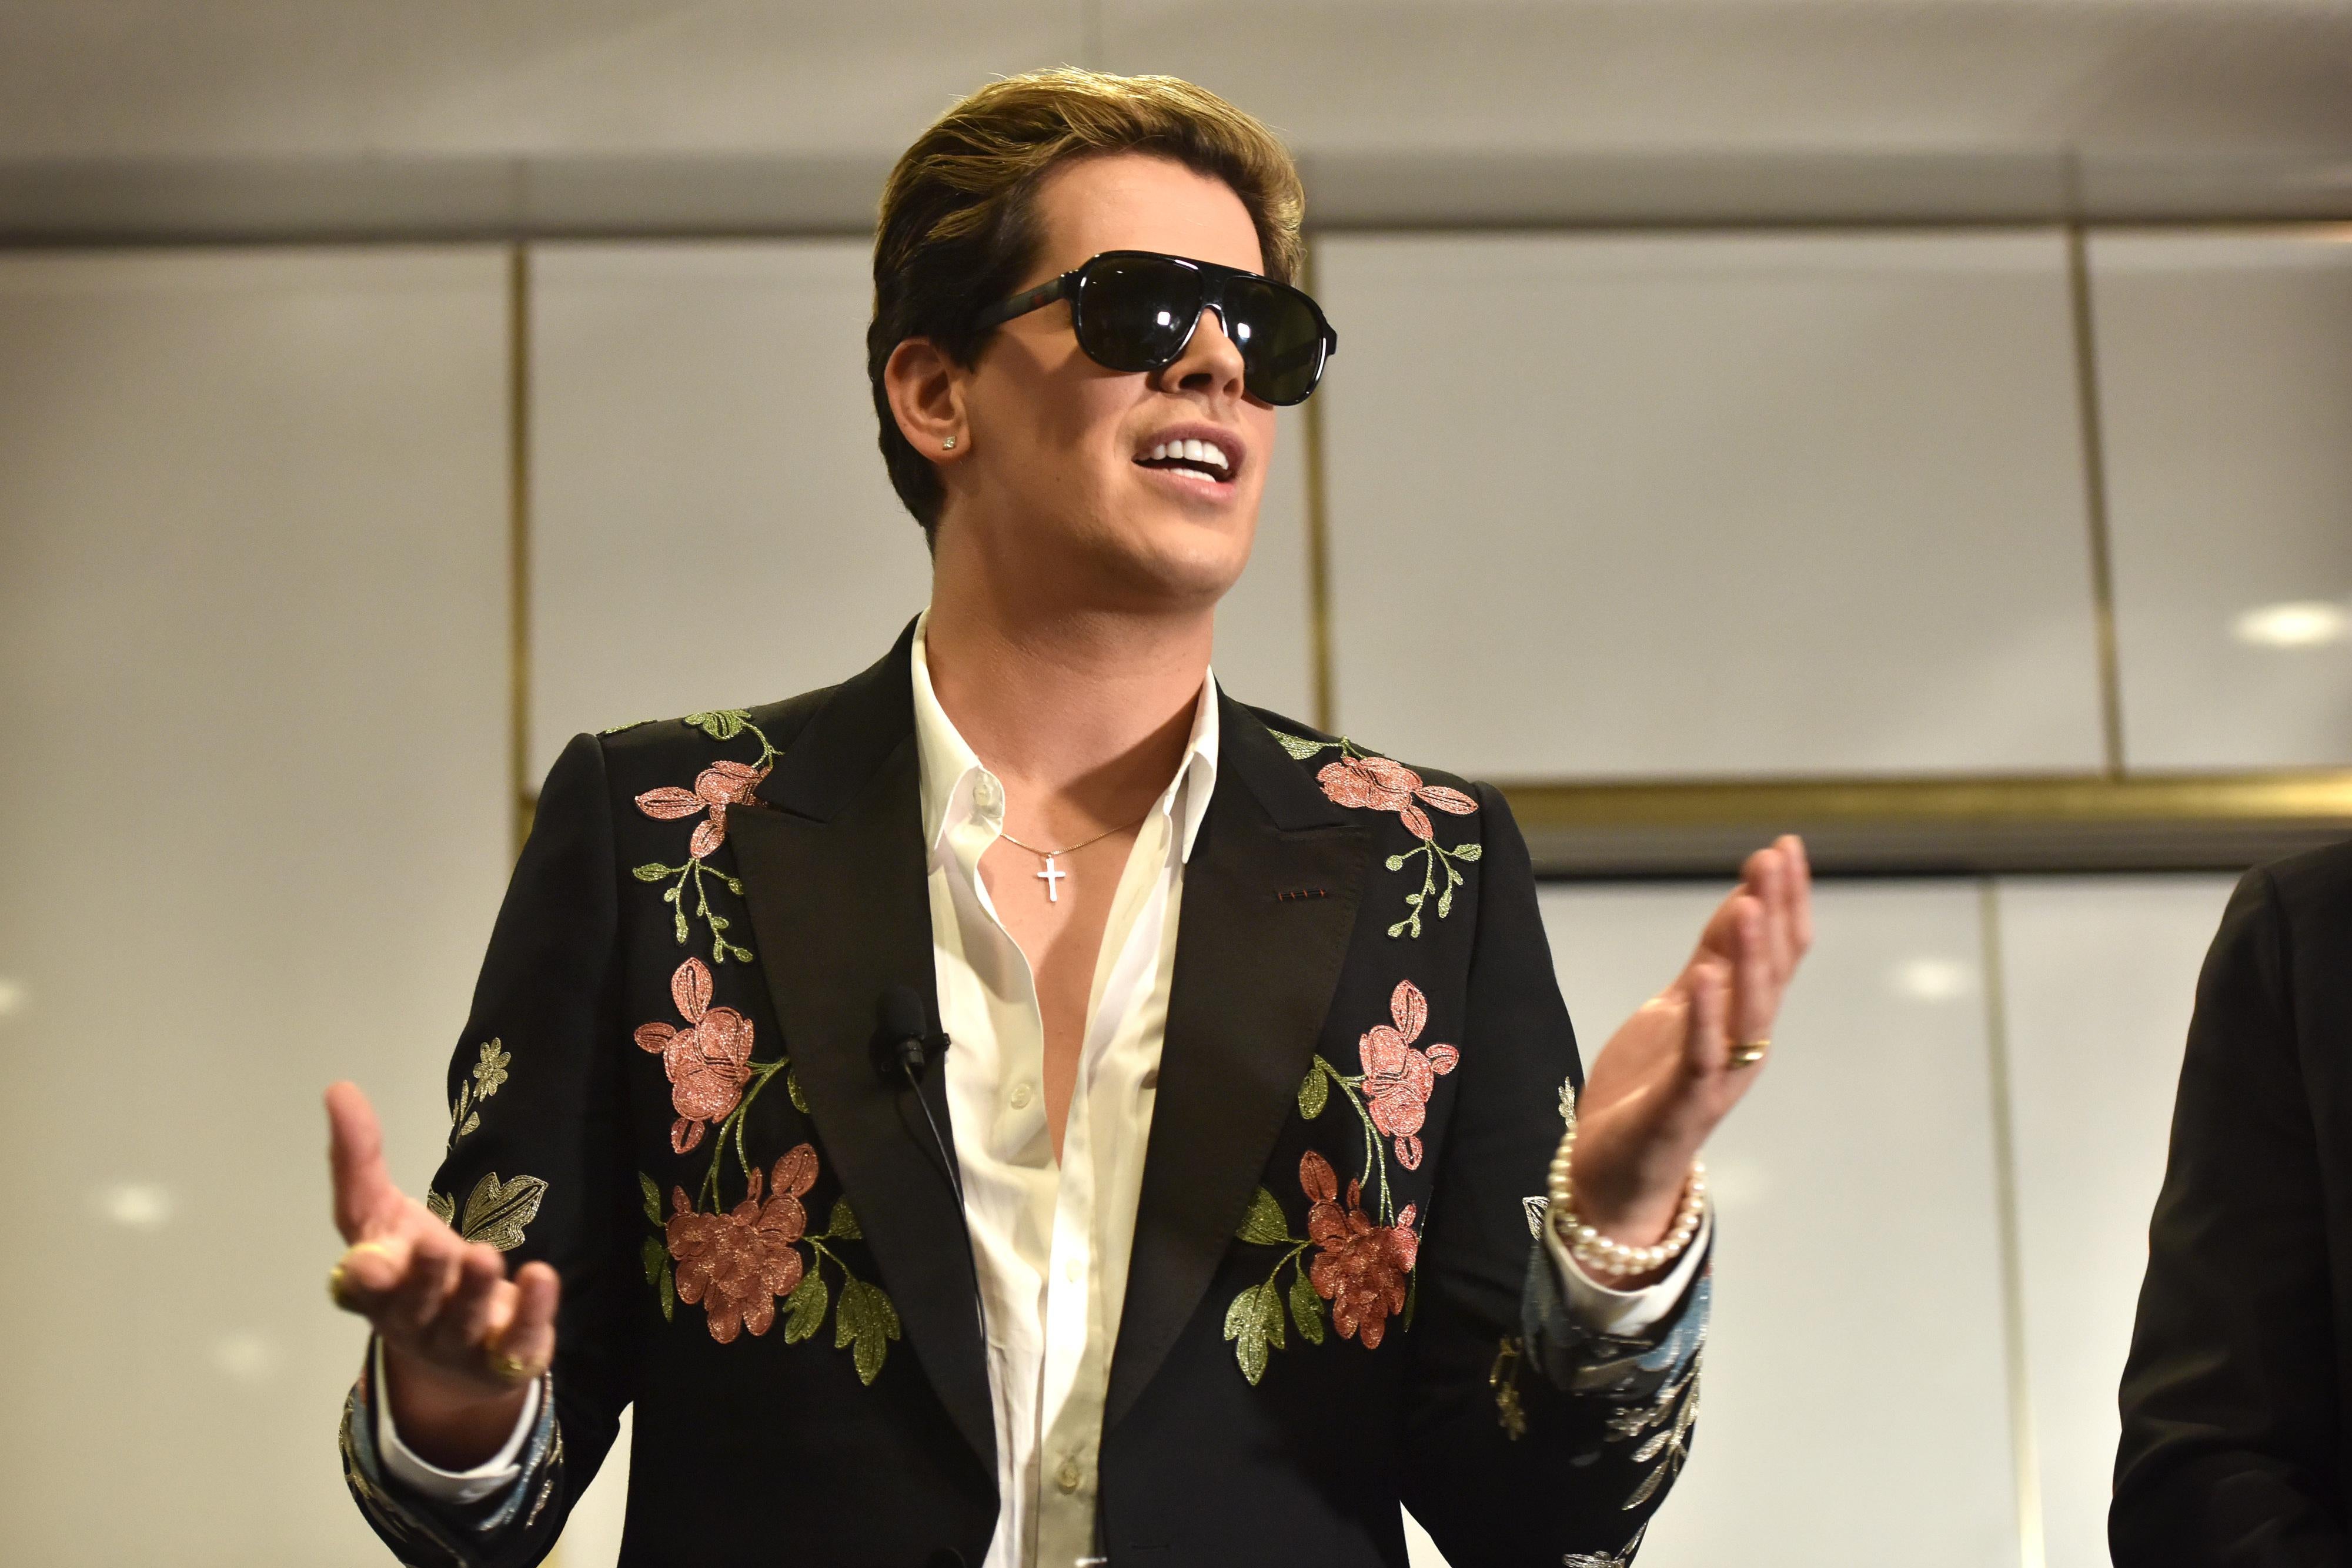 Right-wing British provocateur Milo Yiannopoulos answers questions during a speech at Parliament House in Canberra on December 5, 2017.
Yiannopoulos blasted those who do not agree with him as 'petulant babies' after violent protests in Melbourne. The polarising former Breitbart editor is touring with his 'The Troll Academy' speaking show. Hundreds of protestors clashed with police and supporters of Yiannopoulos outside a supposedly secret venue in Melbourne on December 4.
 / AFP PHOTO / MARK GRAHAM        (Photo credit should read MARK GRAHAM/AFP/Getty Images)